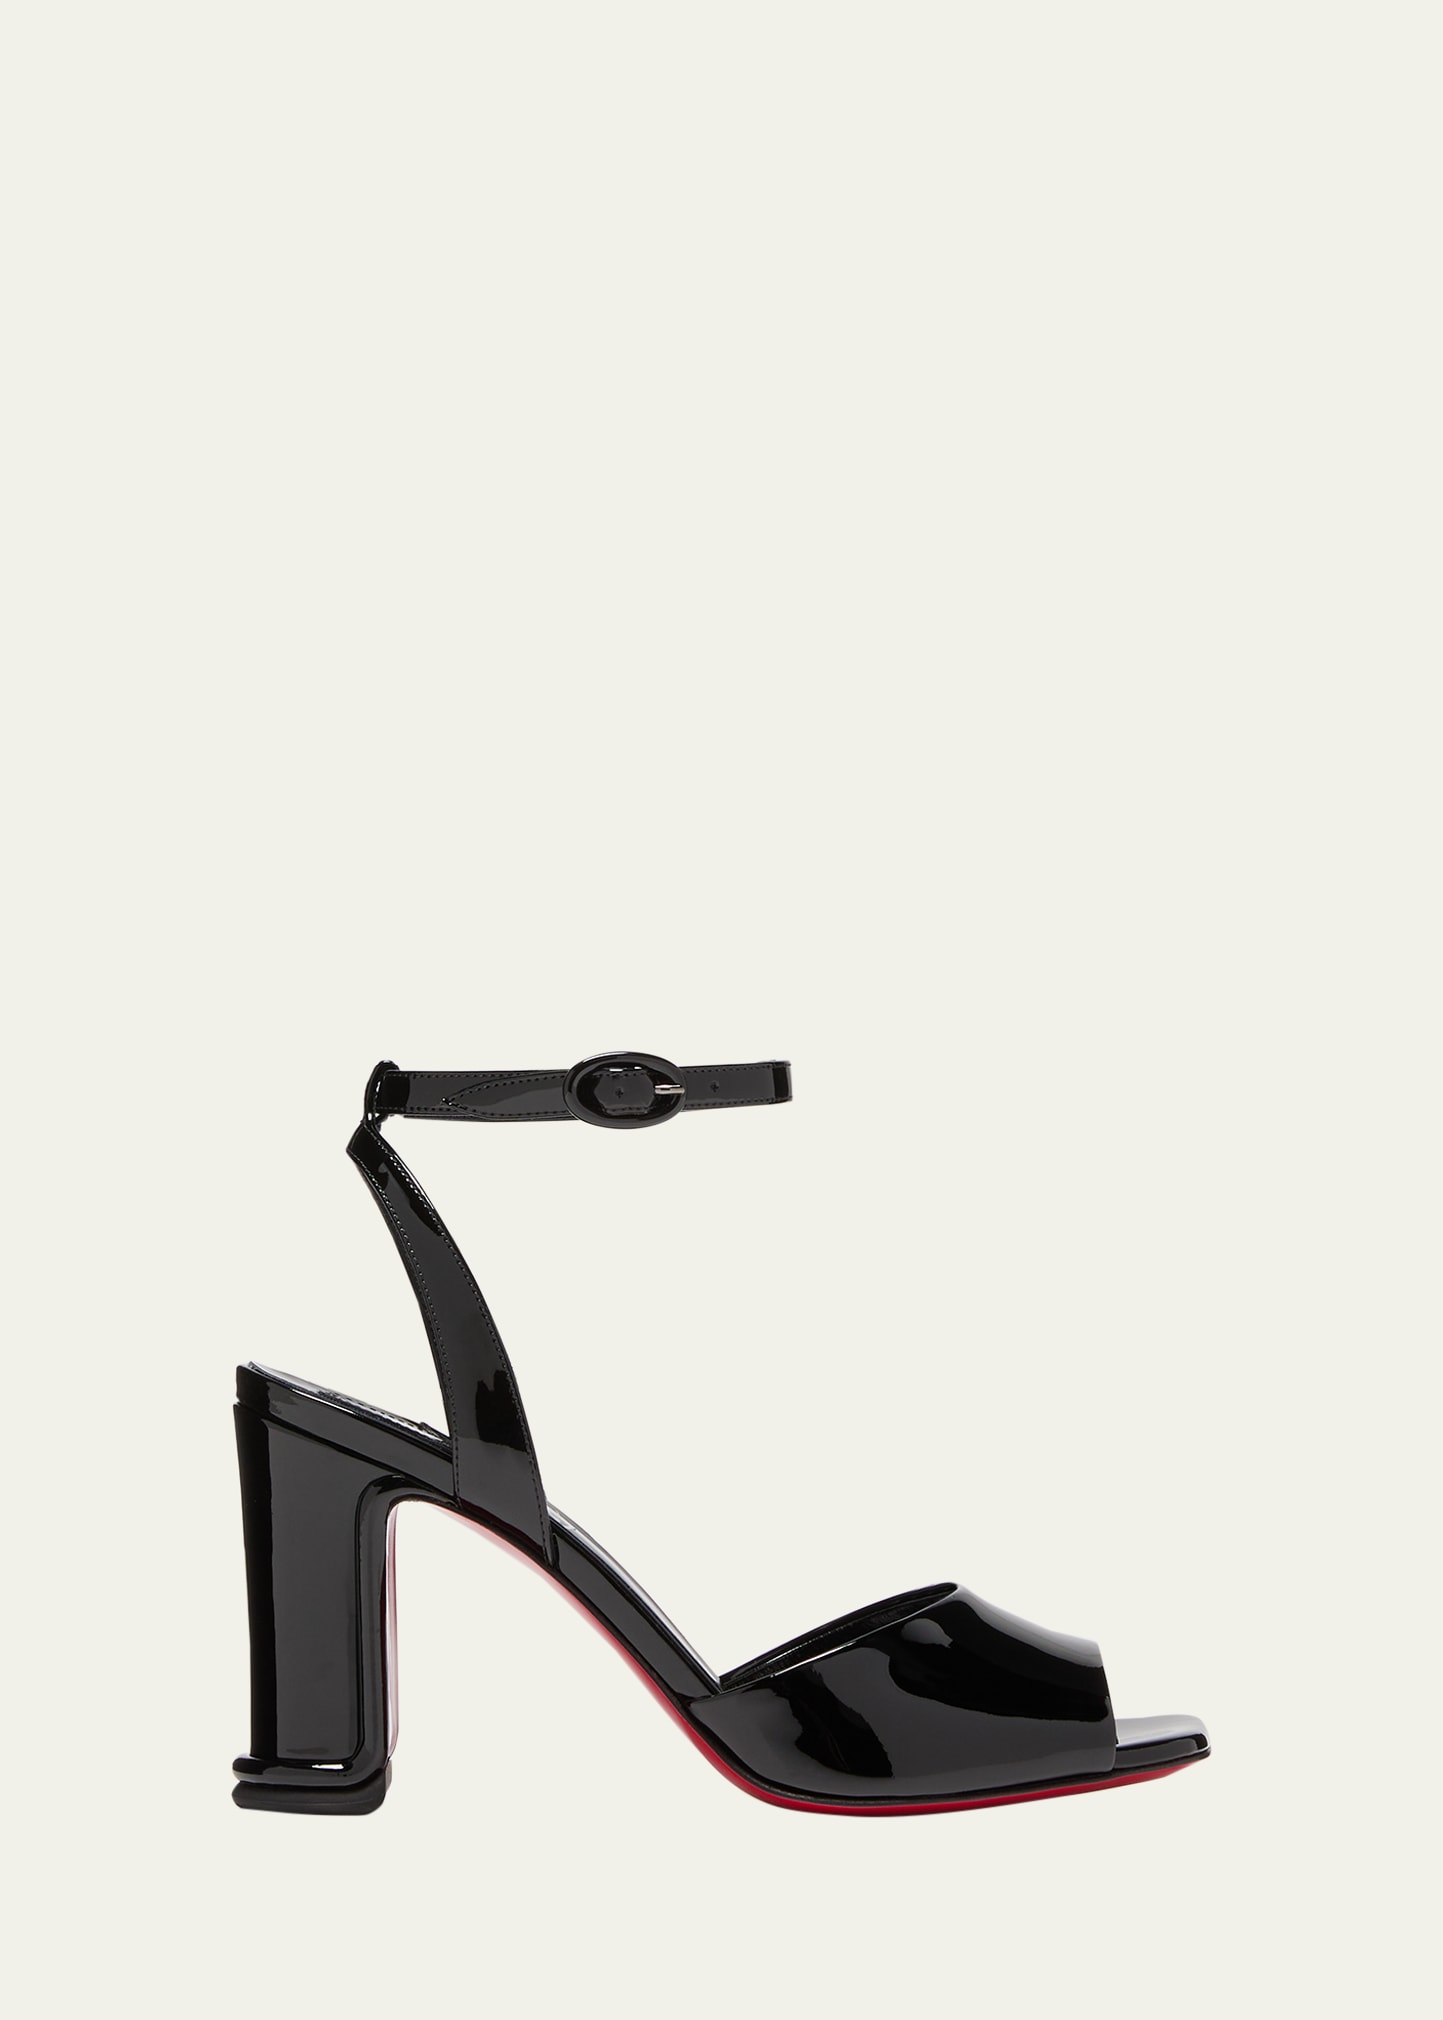 Amalili Patent Red Sole Ankle-Strap Sandals